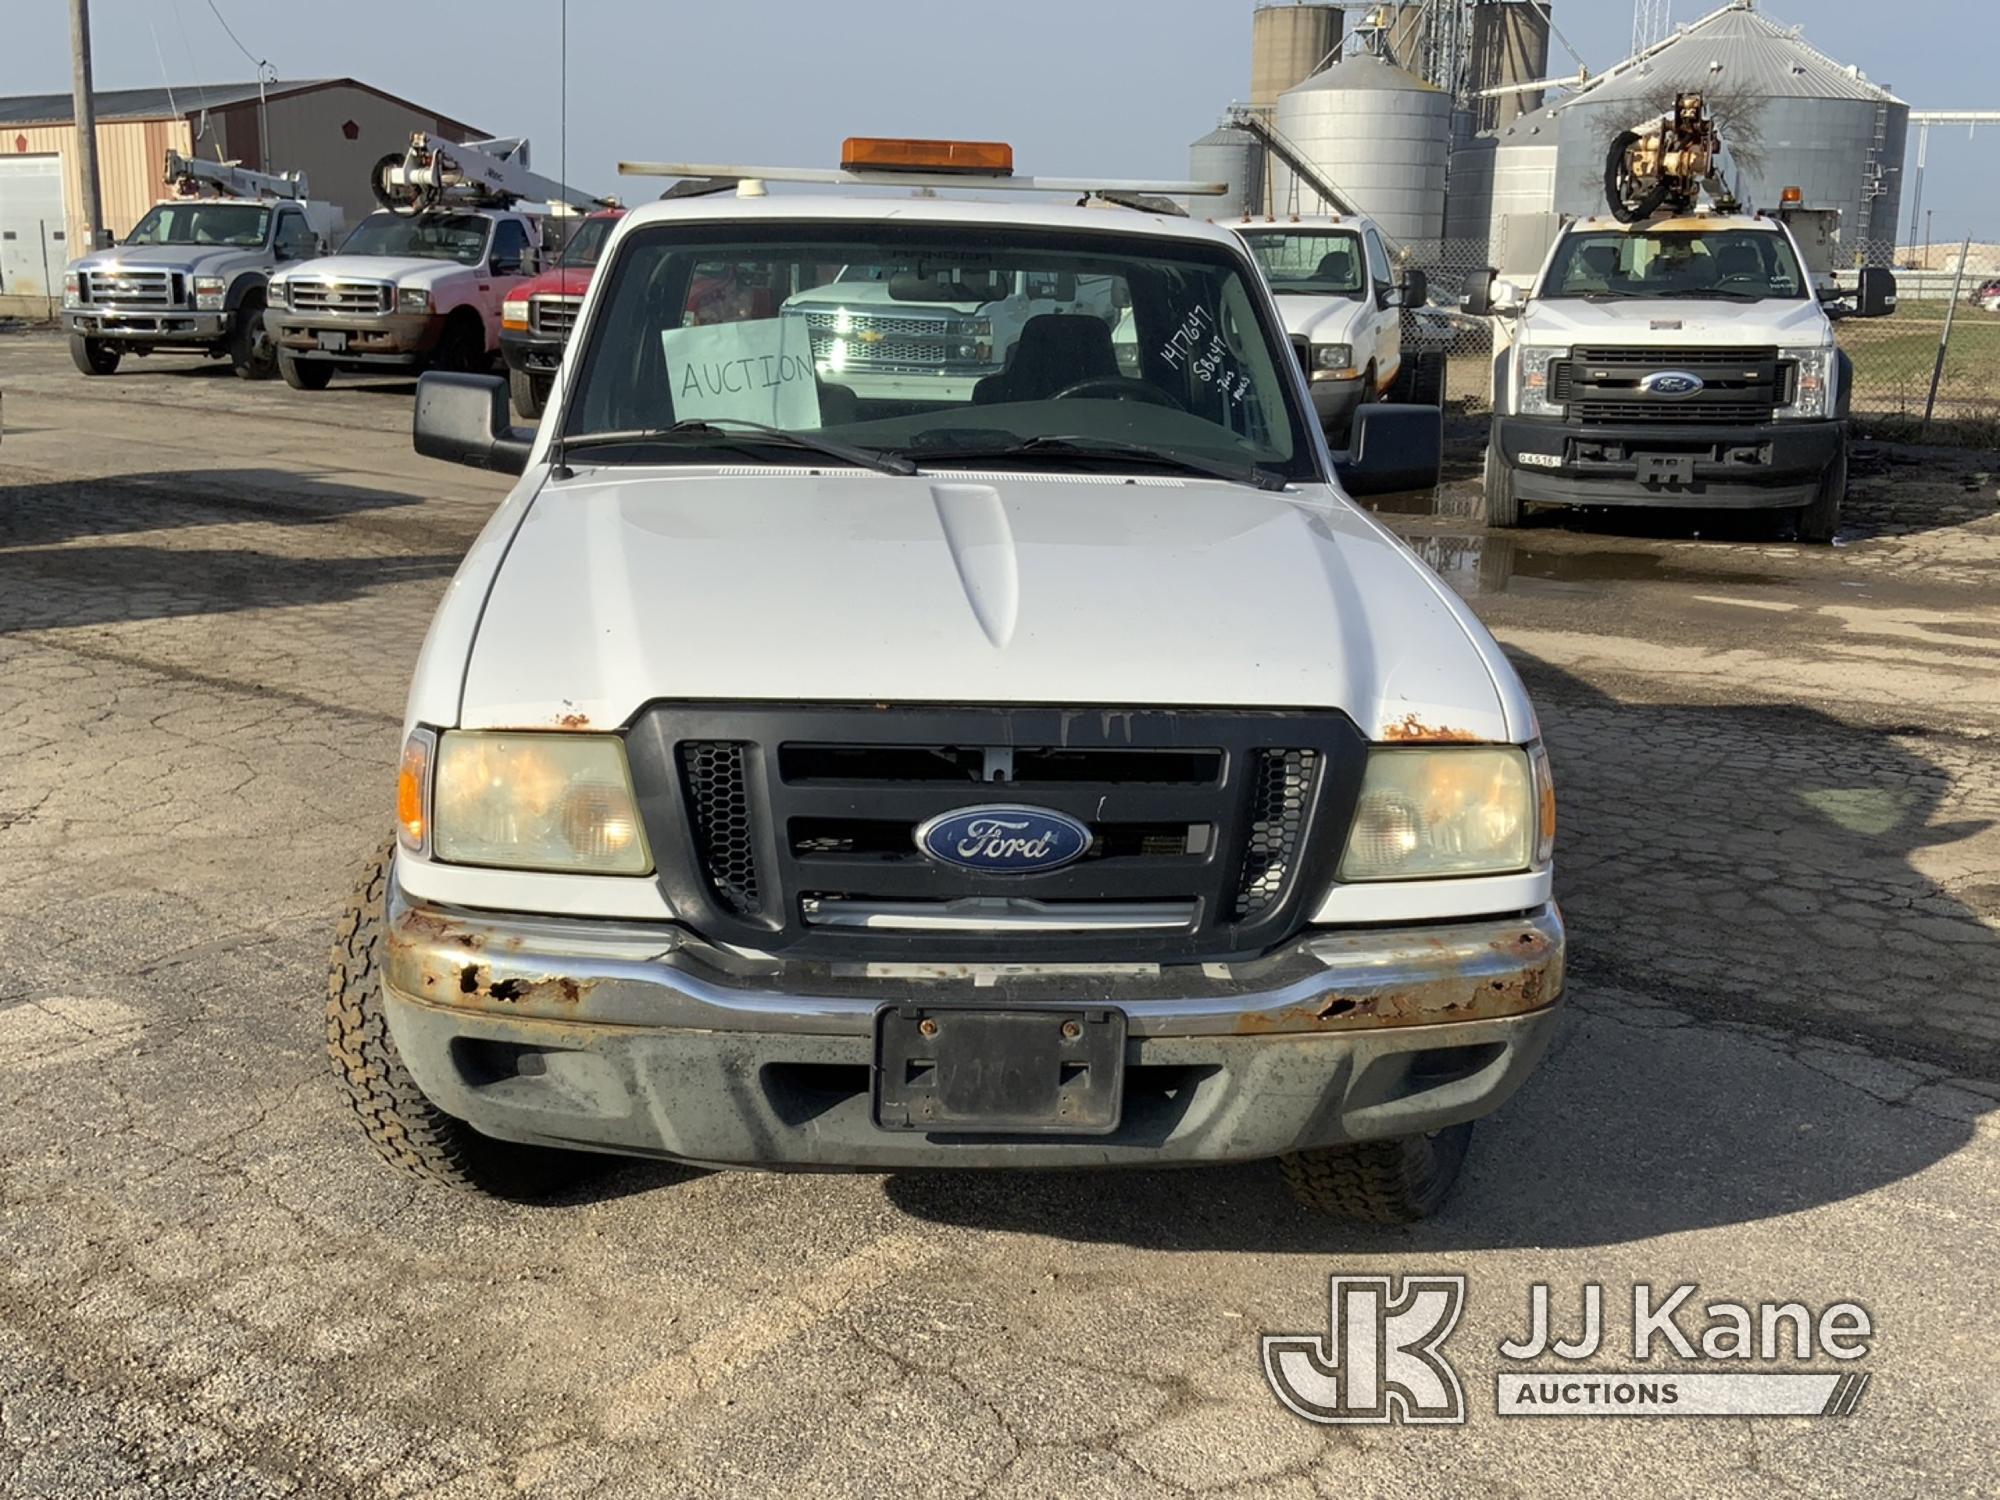 (South Beloit, IL) 2008 Ford Ranger 4x4 Extended-Cab Pickup Truck Runs & Moves) (Rust Damage